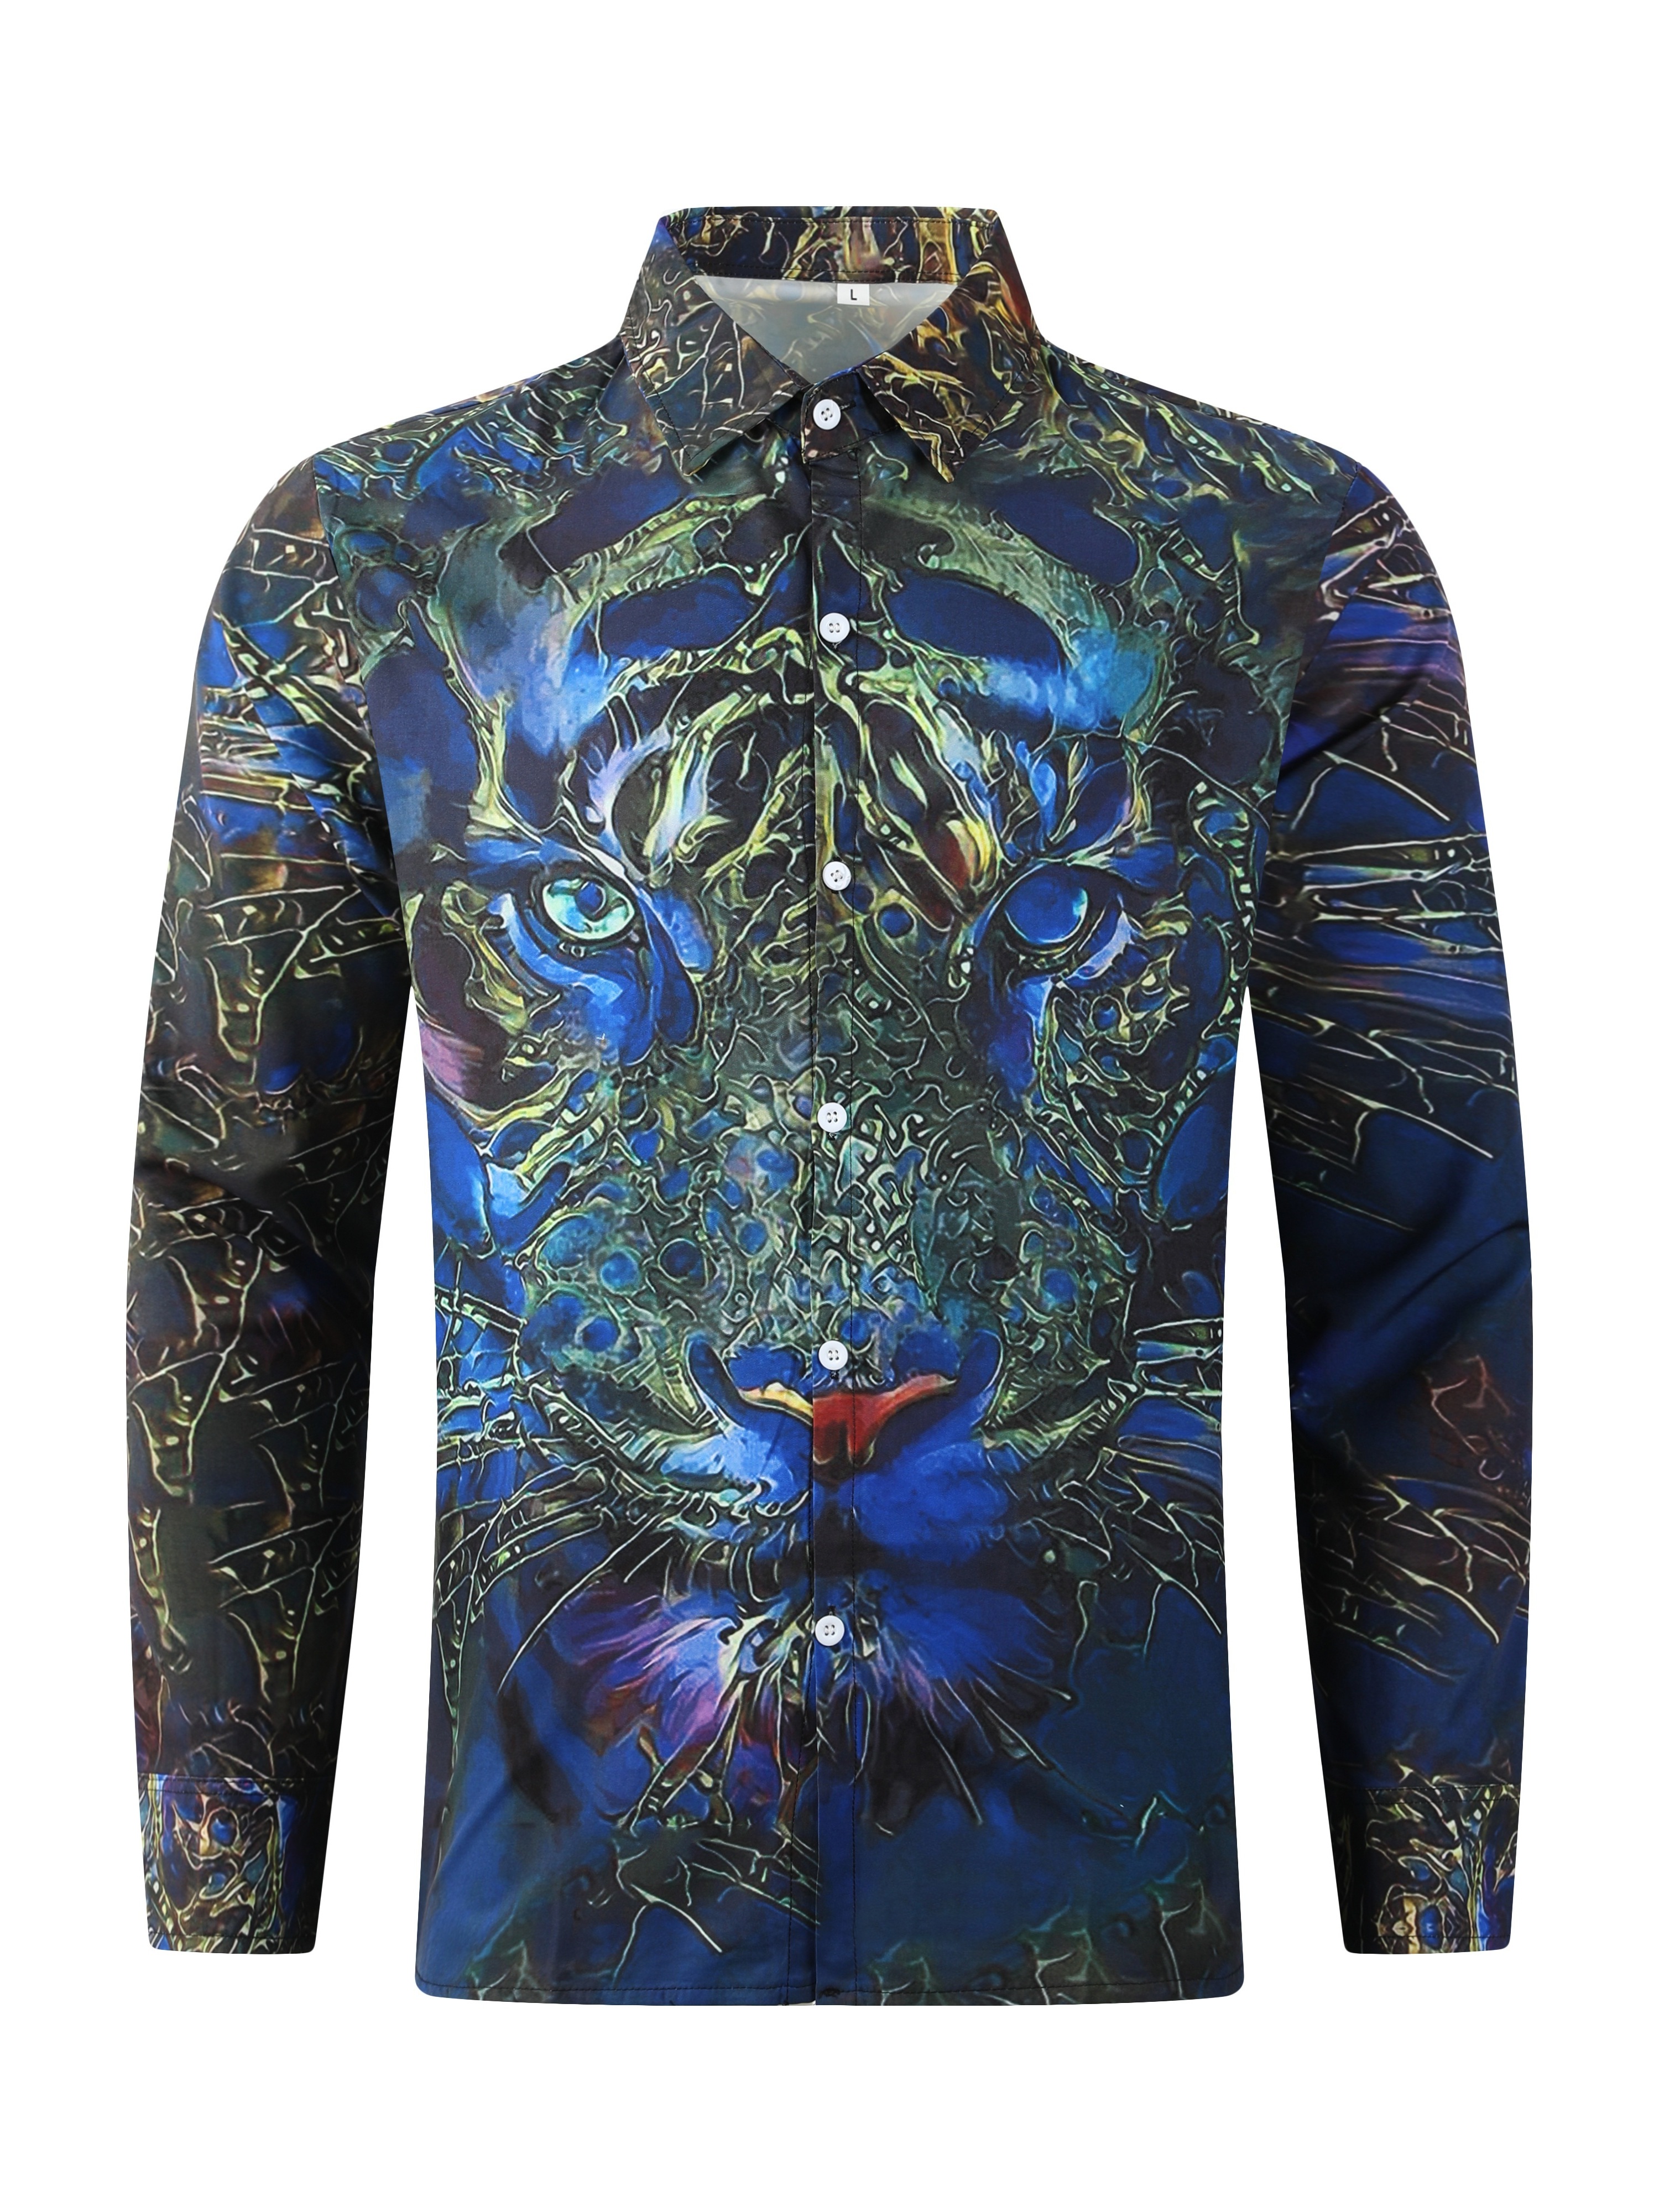 New Mens Abstract Tiger Element Design Slim Fit Shirt Best Sellers